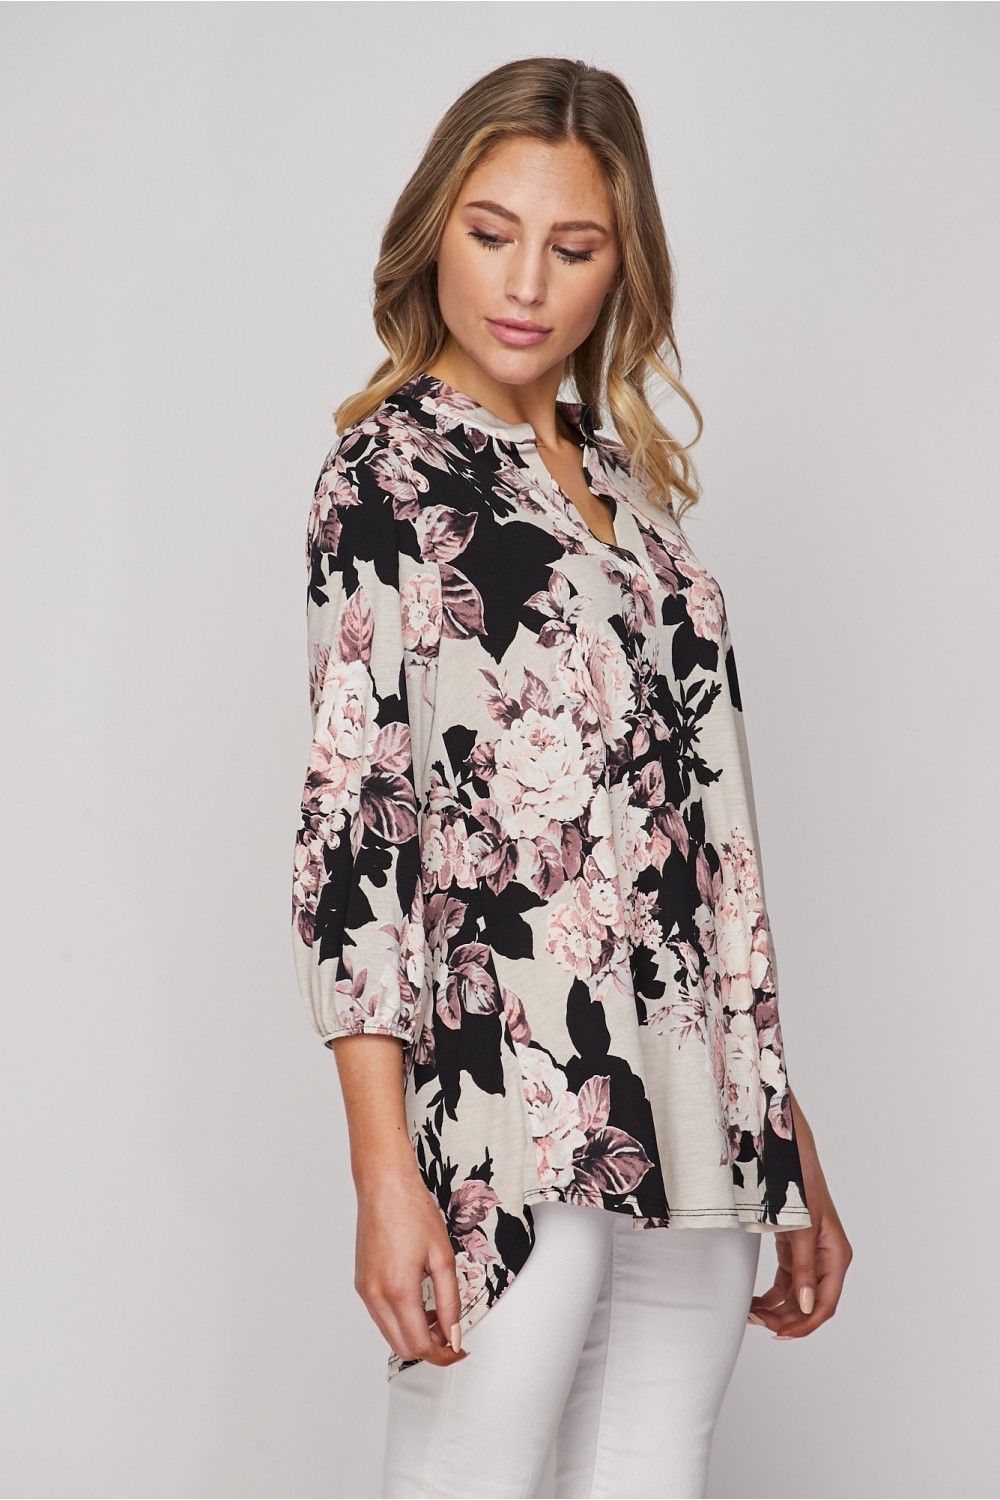 Honeyme Blouse Top with 3/4 Sleeves - Black & Blush Roses Print